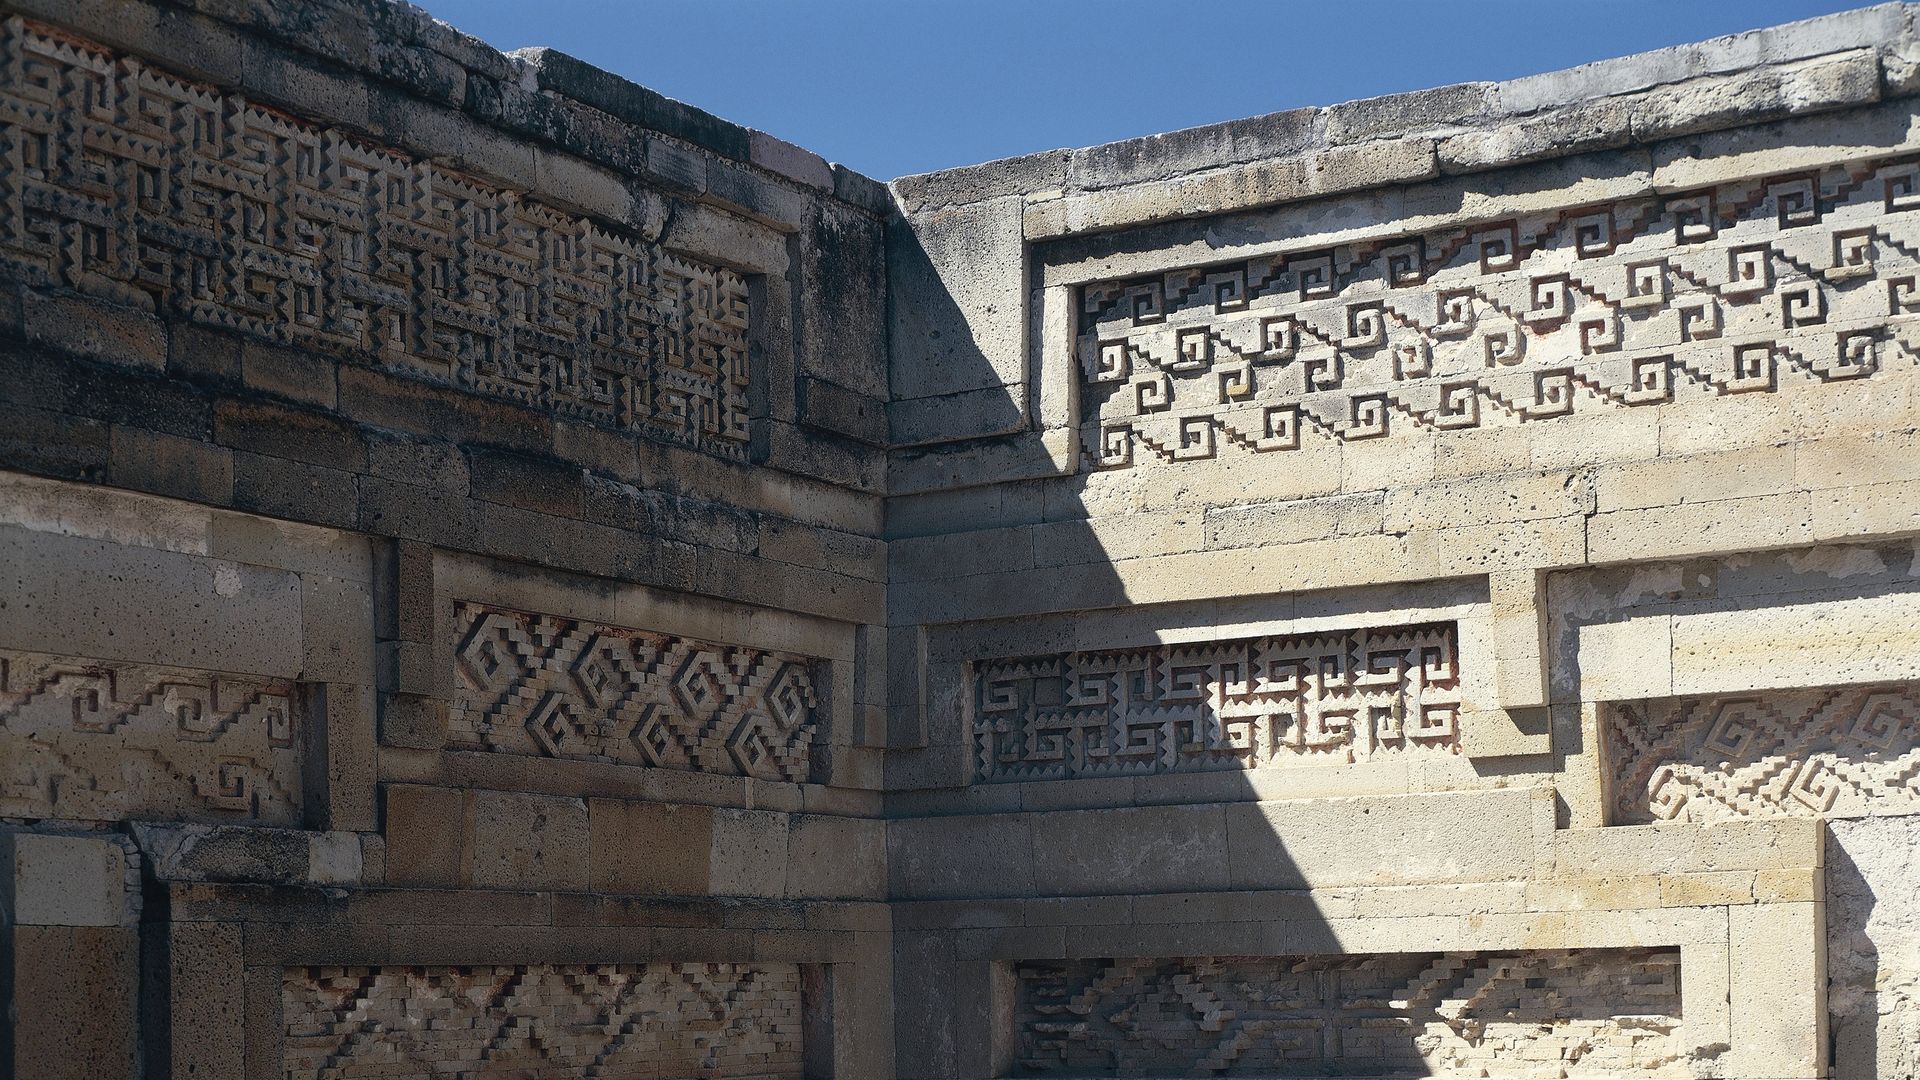 Geometric engravings on a wall in the Palace of the Columns